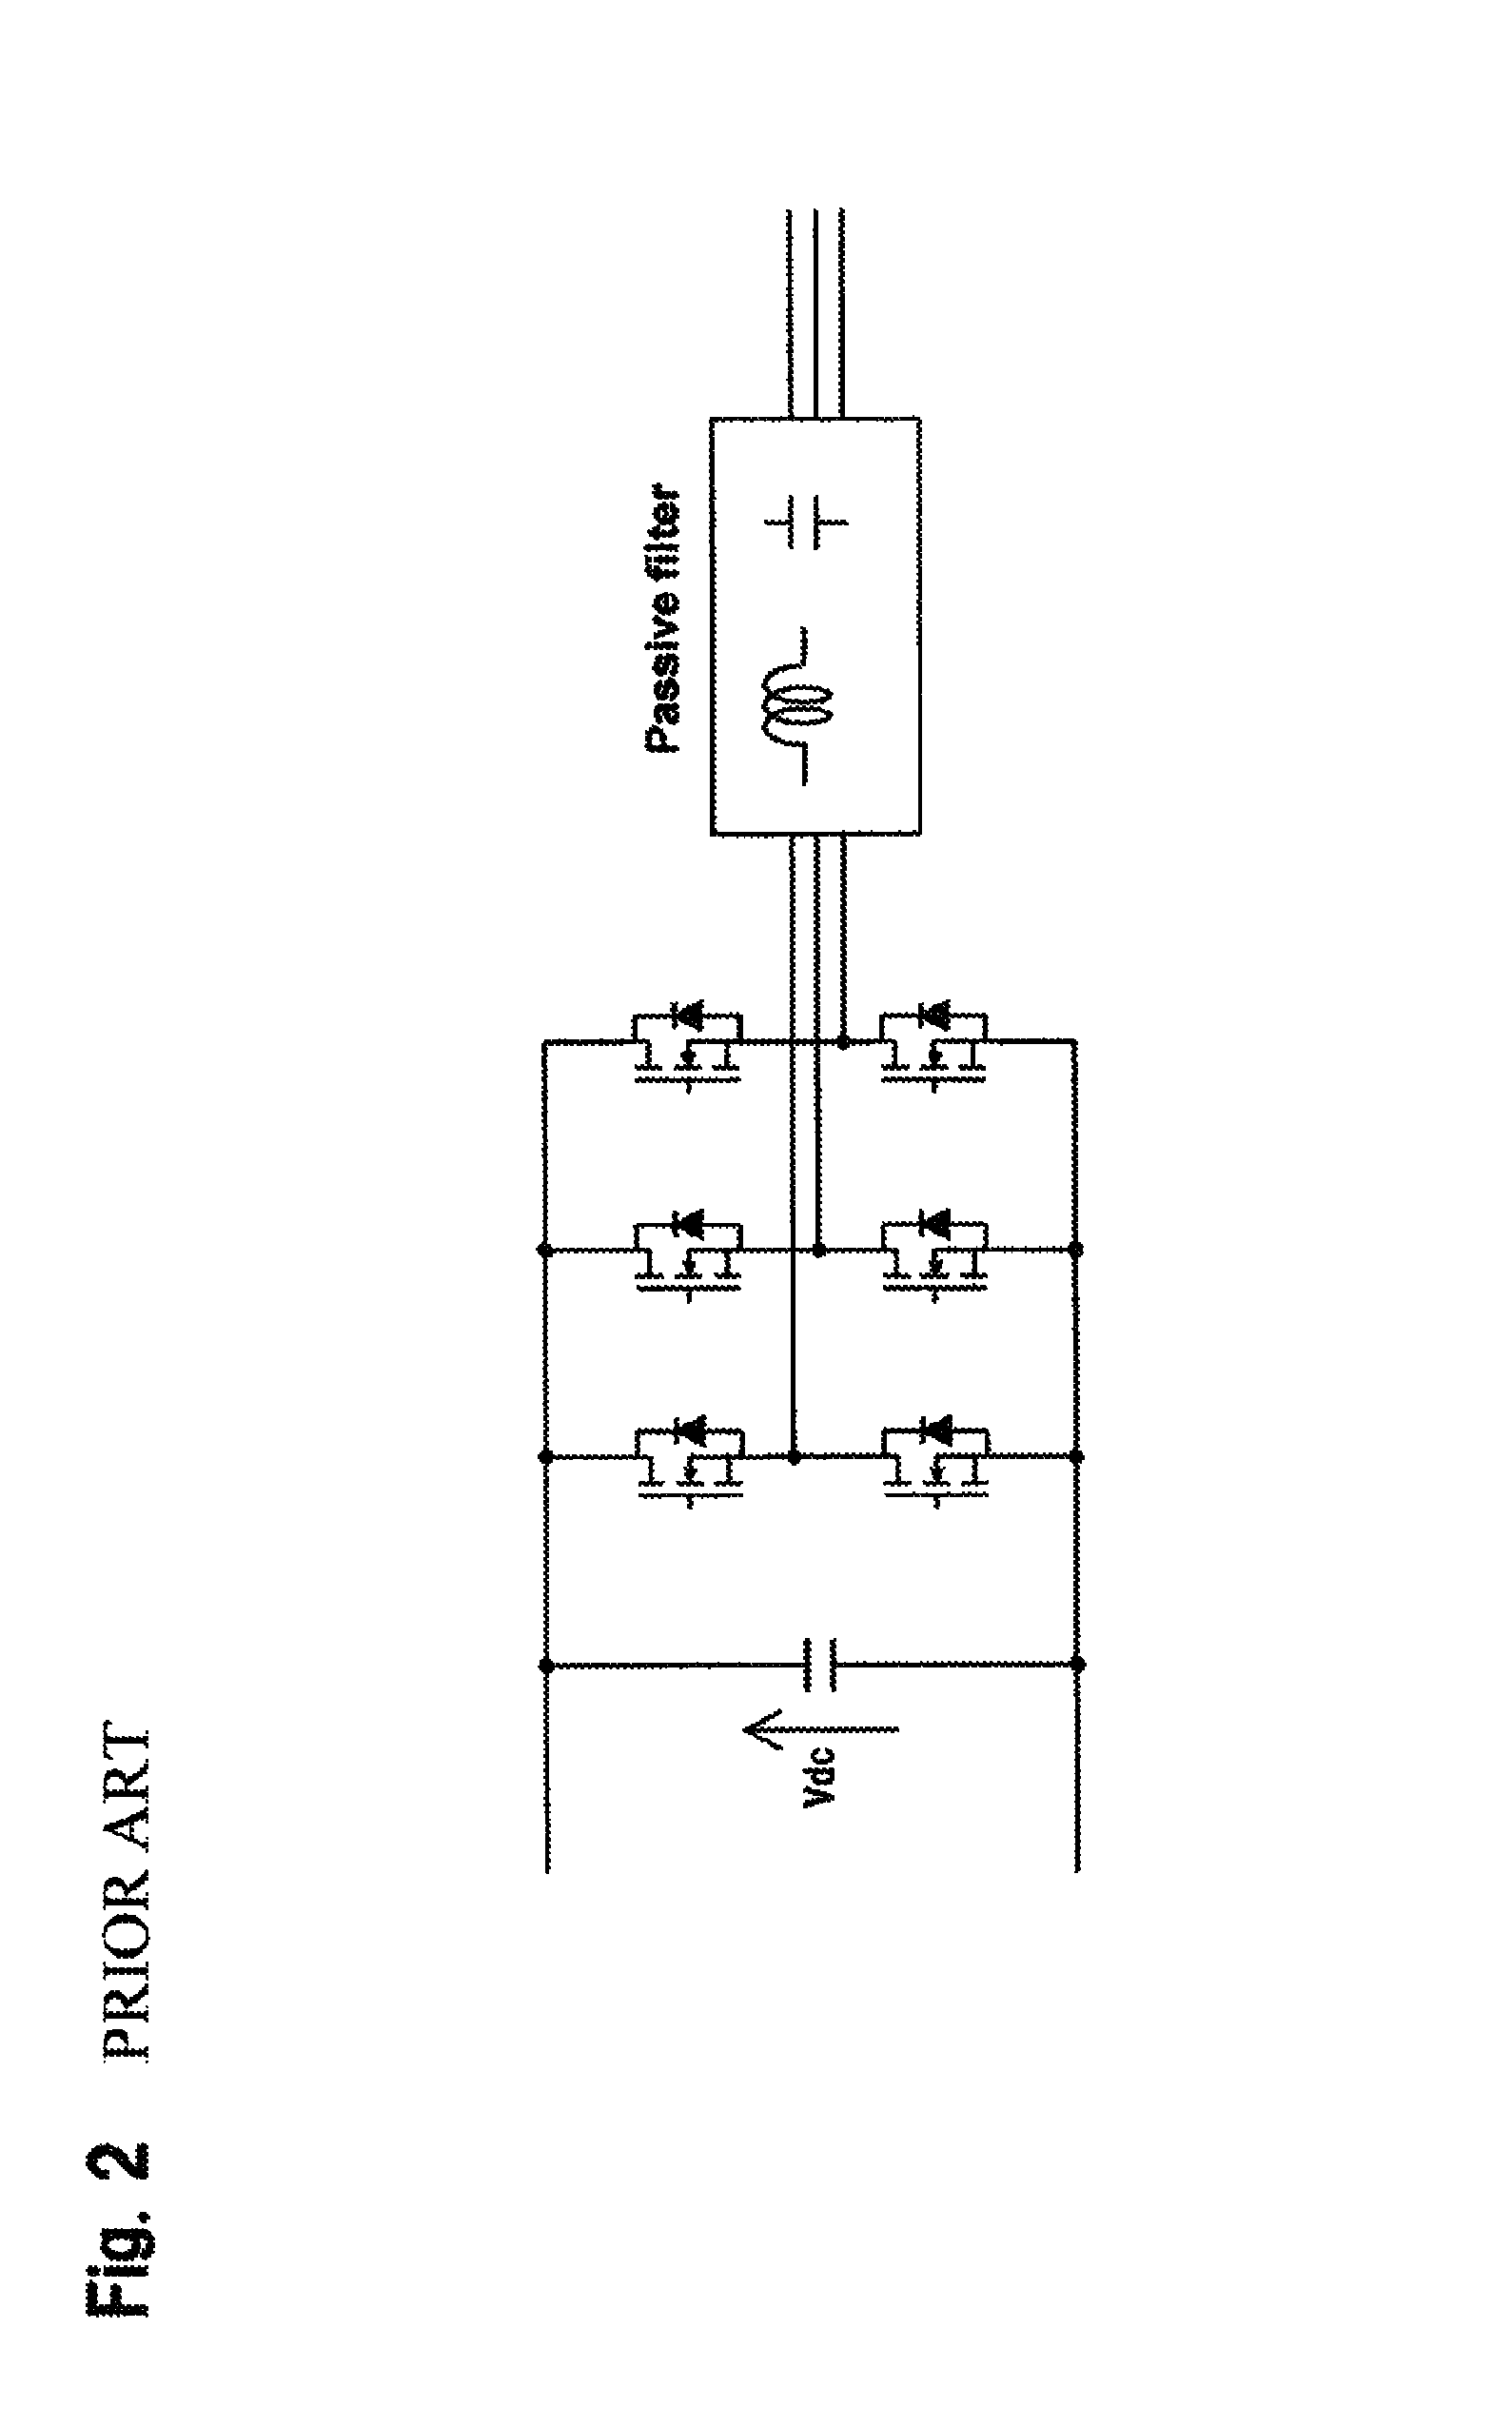 Power conversion apparatus with M conversion levels having an individual drive unit that does not require a dedicated power supply